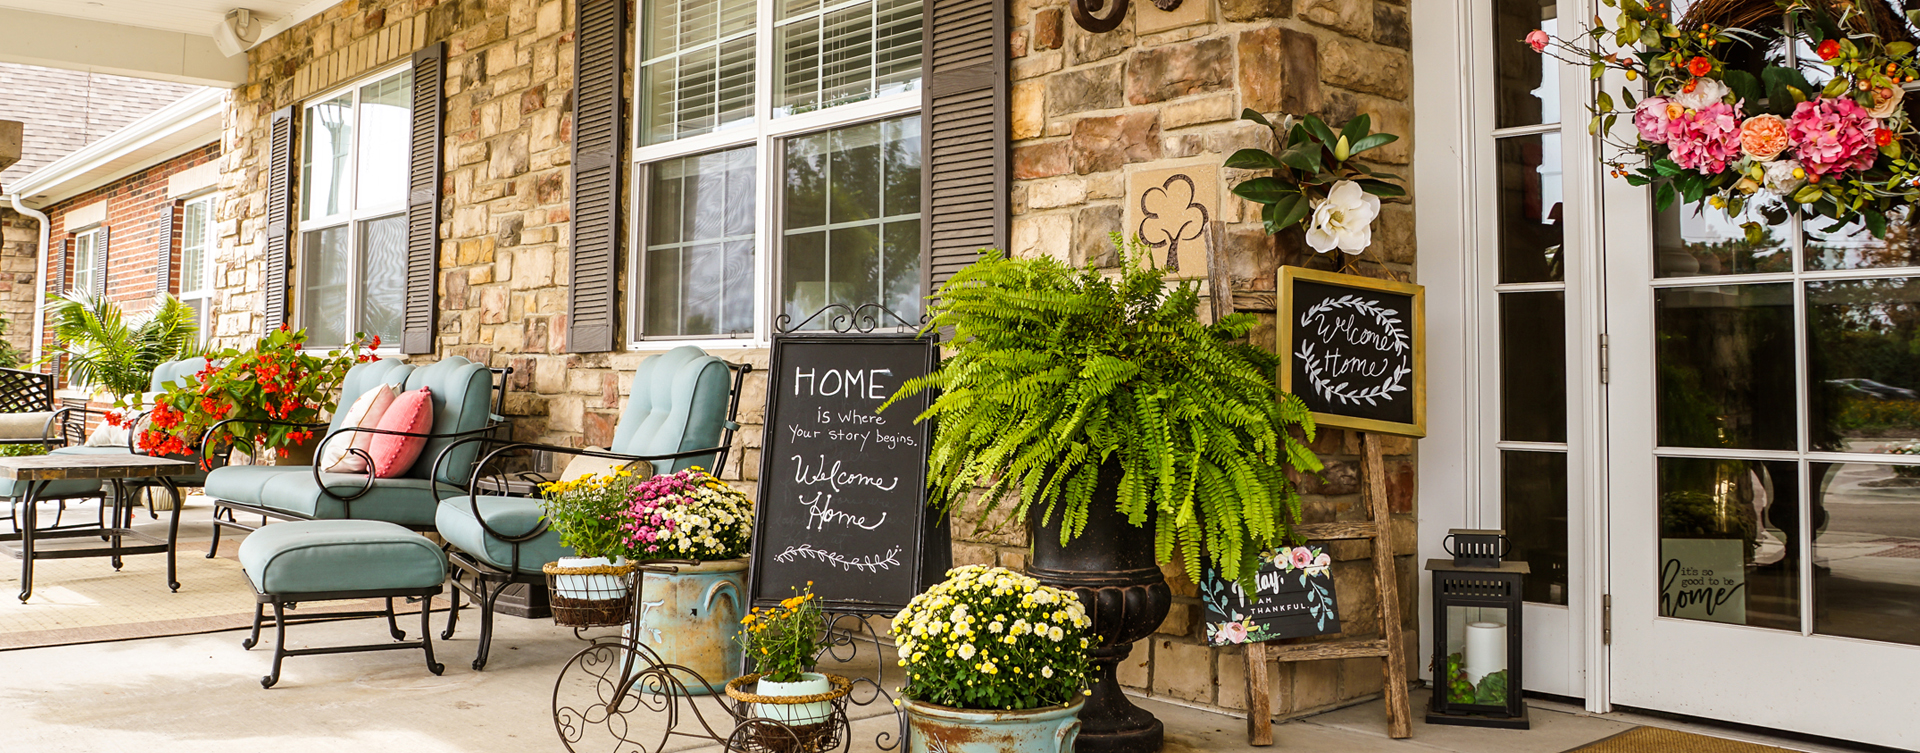 Relax in your favorite chair on the porch at Bickford of Gurnee